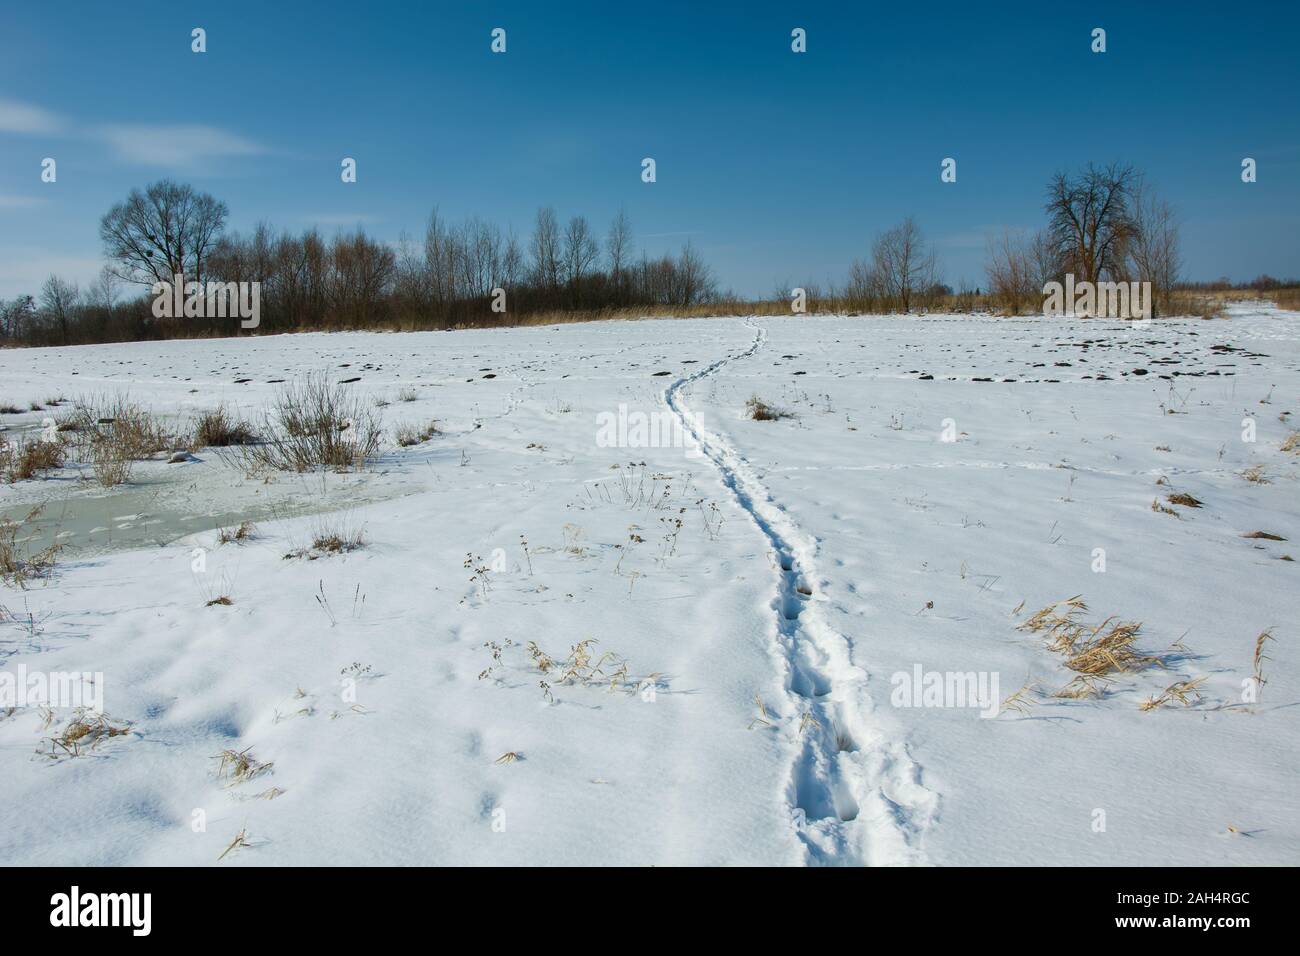 Traces of animals on the snow, horizon and blue sky Stock Photo